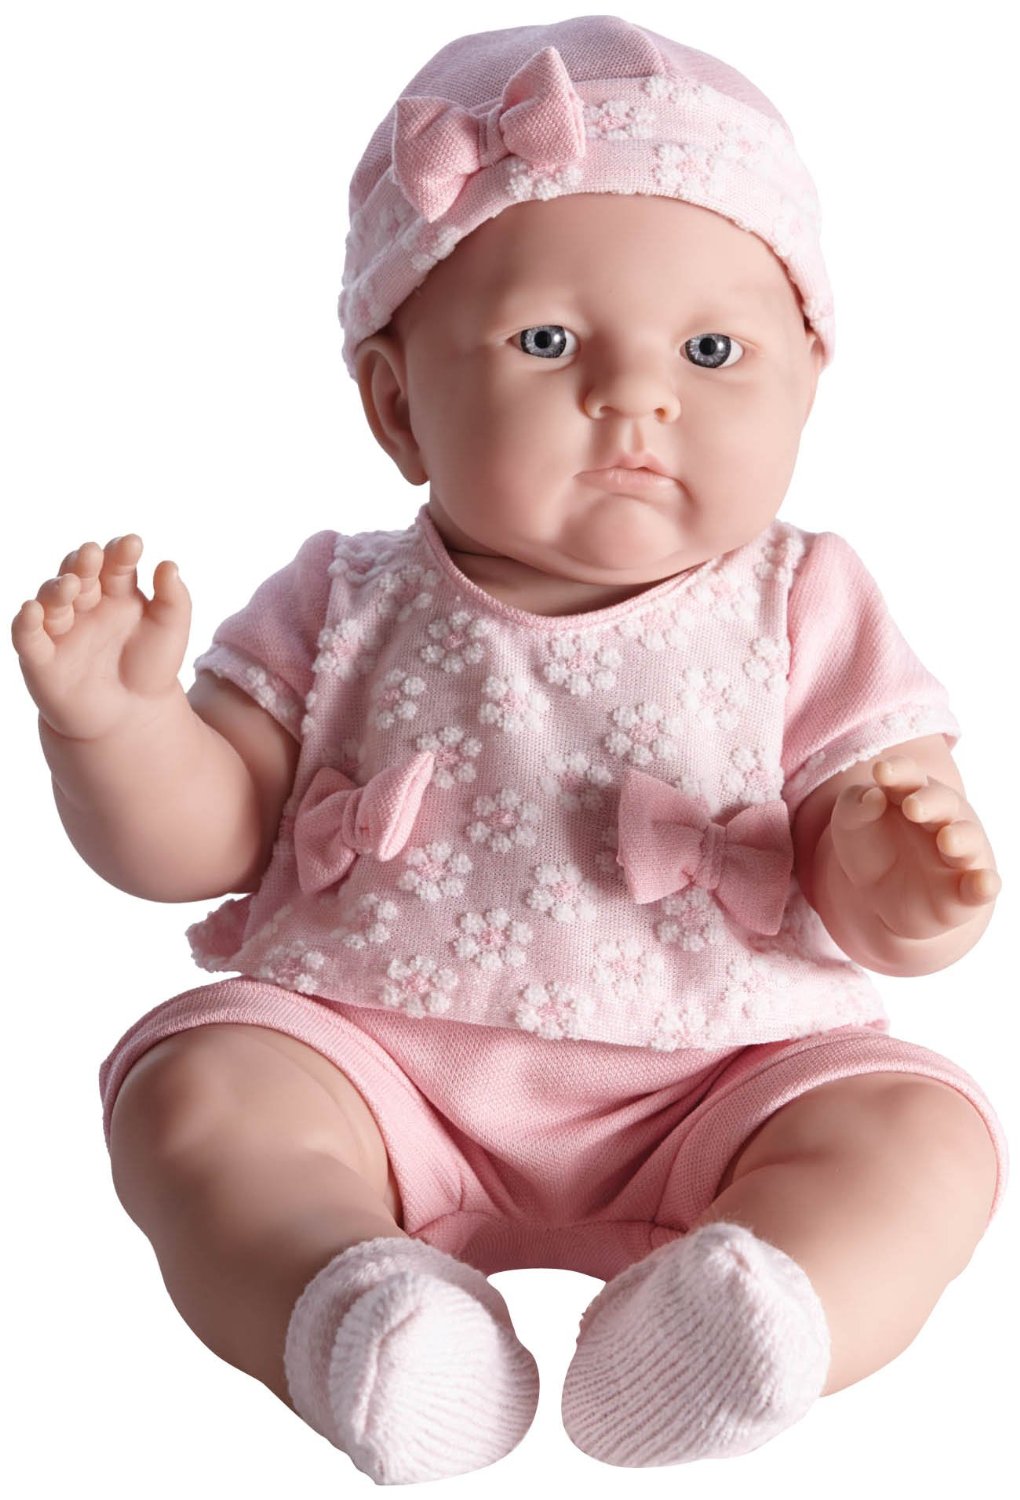 All-Vinyl Baby Doll. Pink 3 piece outfit. REAL GIRL!